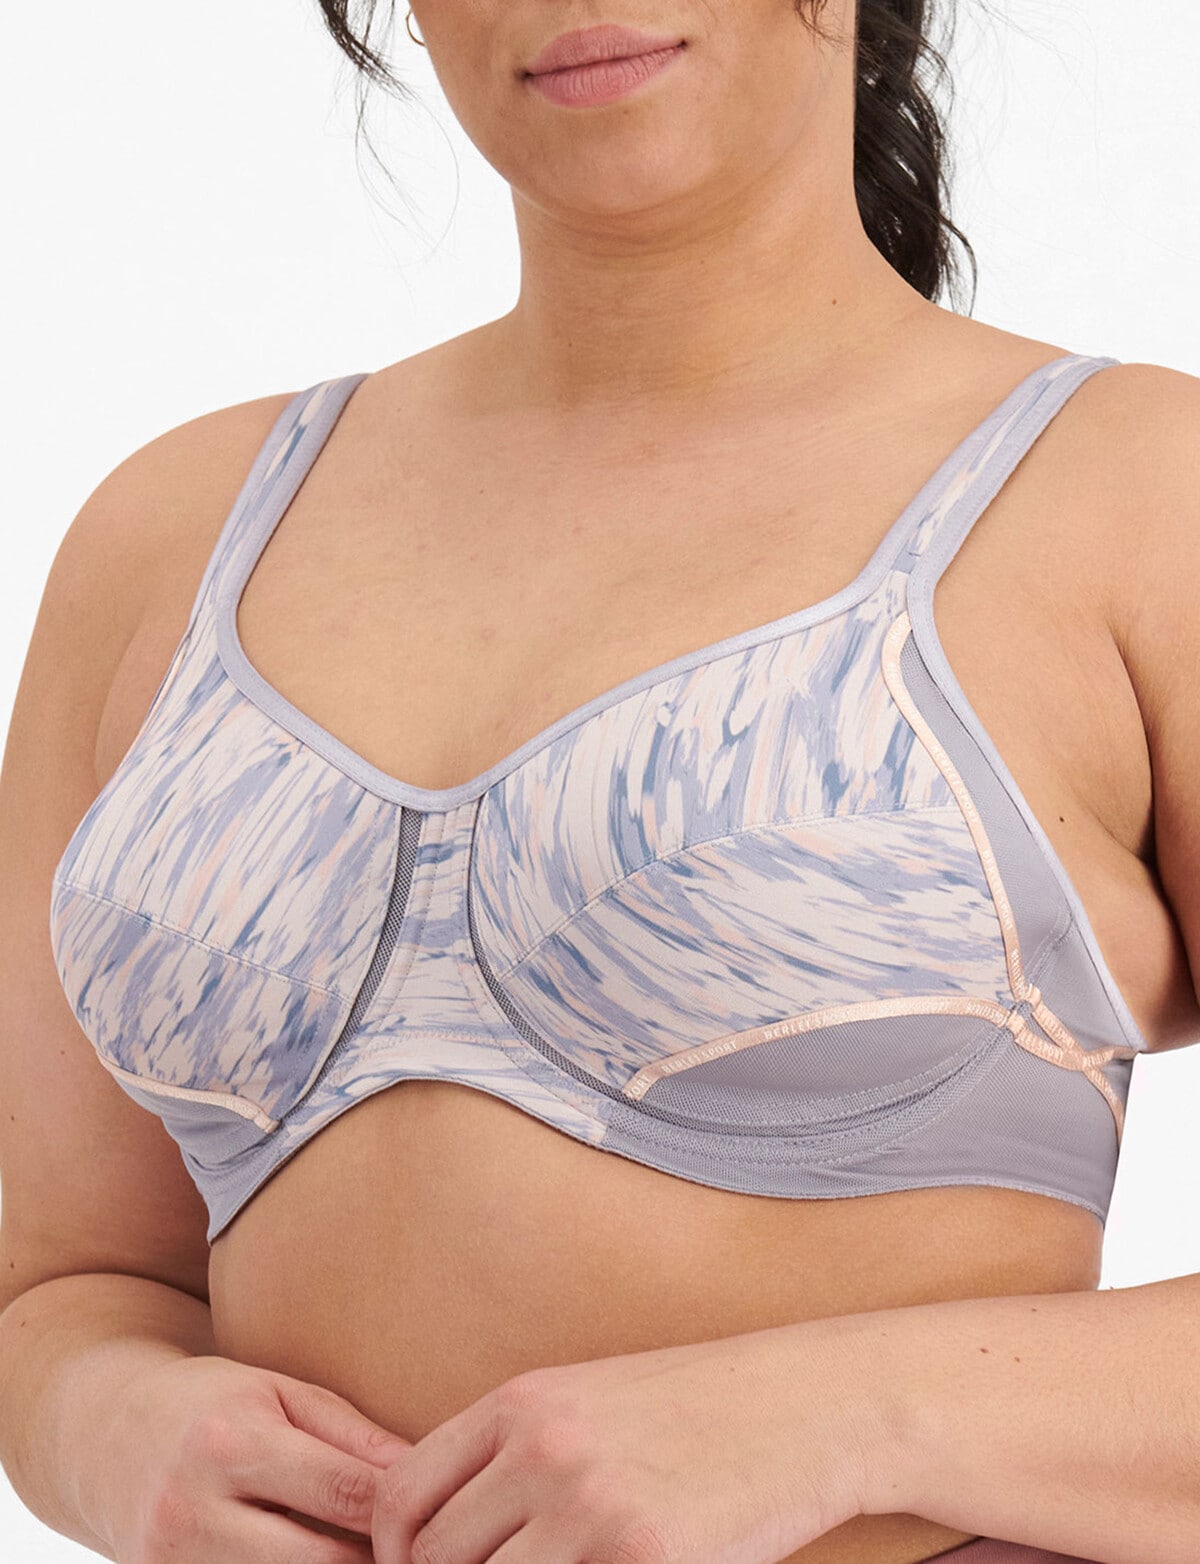 bras.co.nz - Berlei Lift & Shape Underwire Bra, $52.46 (25% off RRP $69.95)    Check out other Berlei bras and briefs